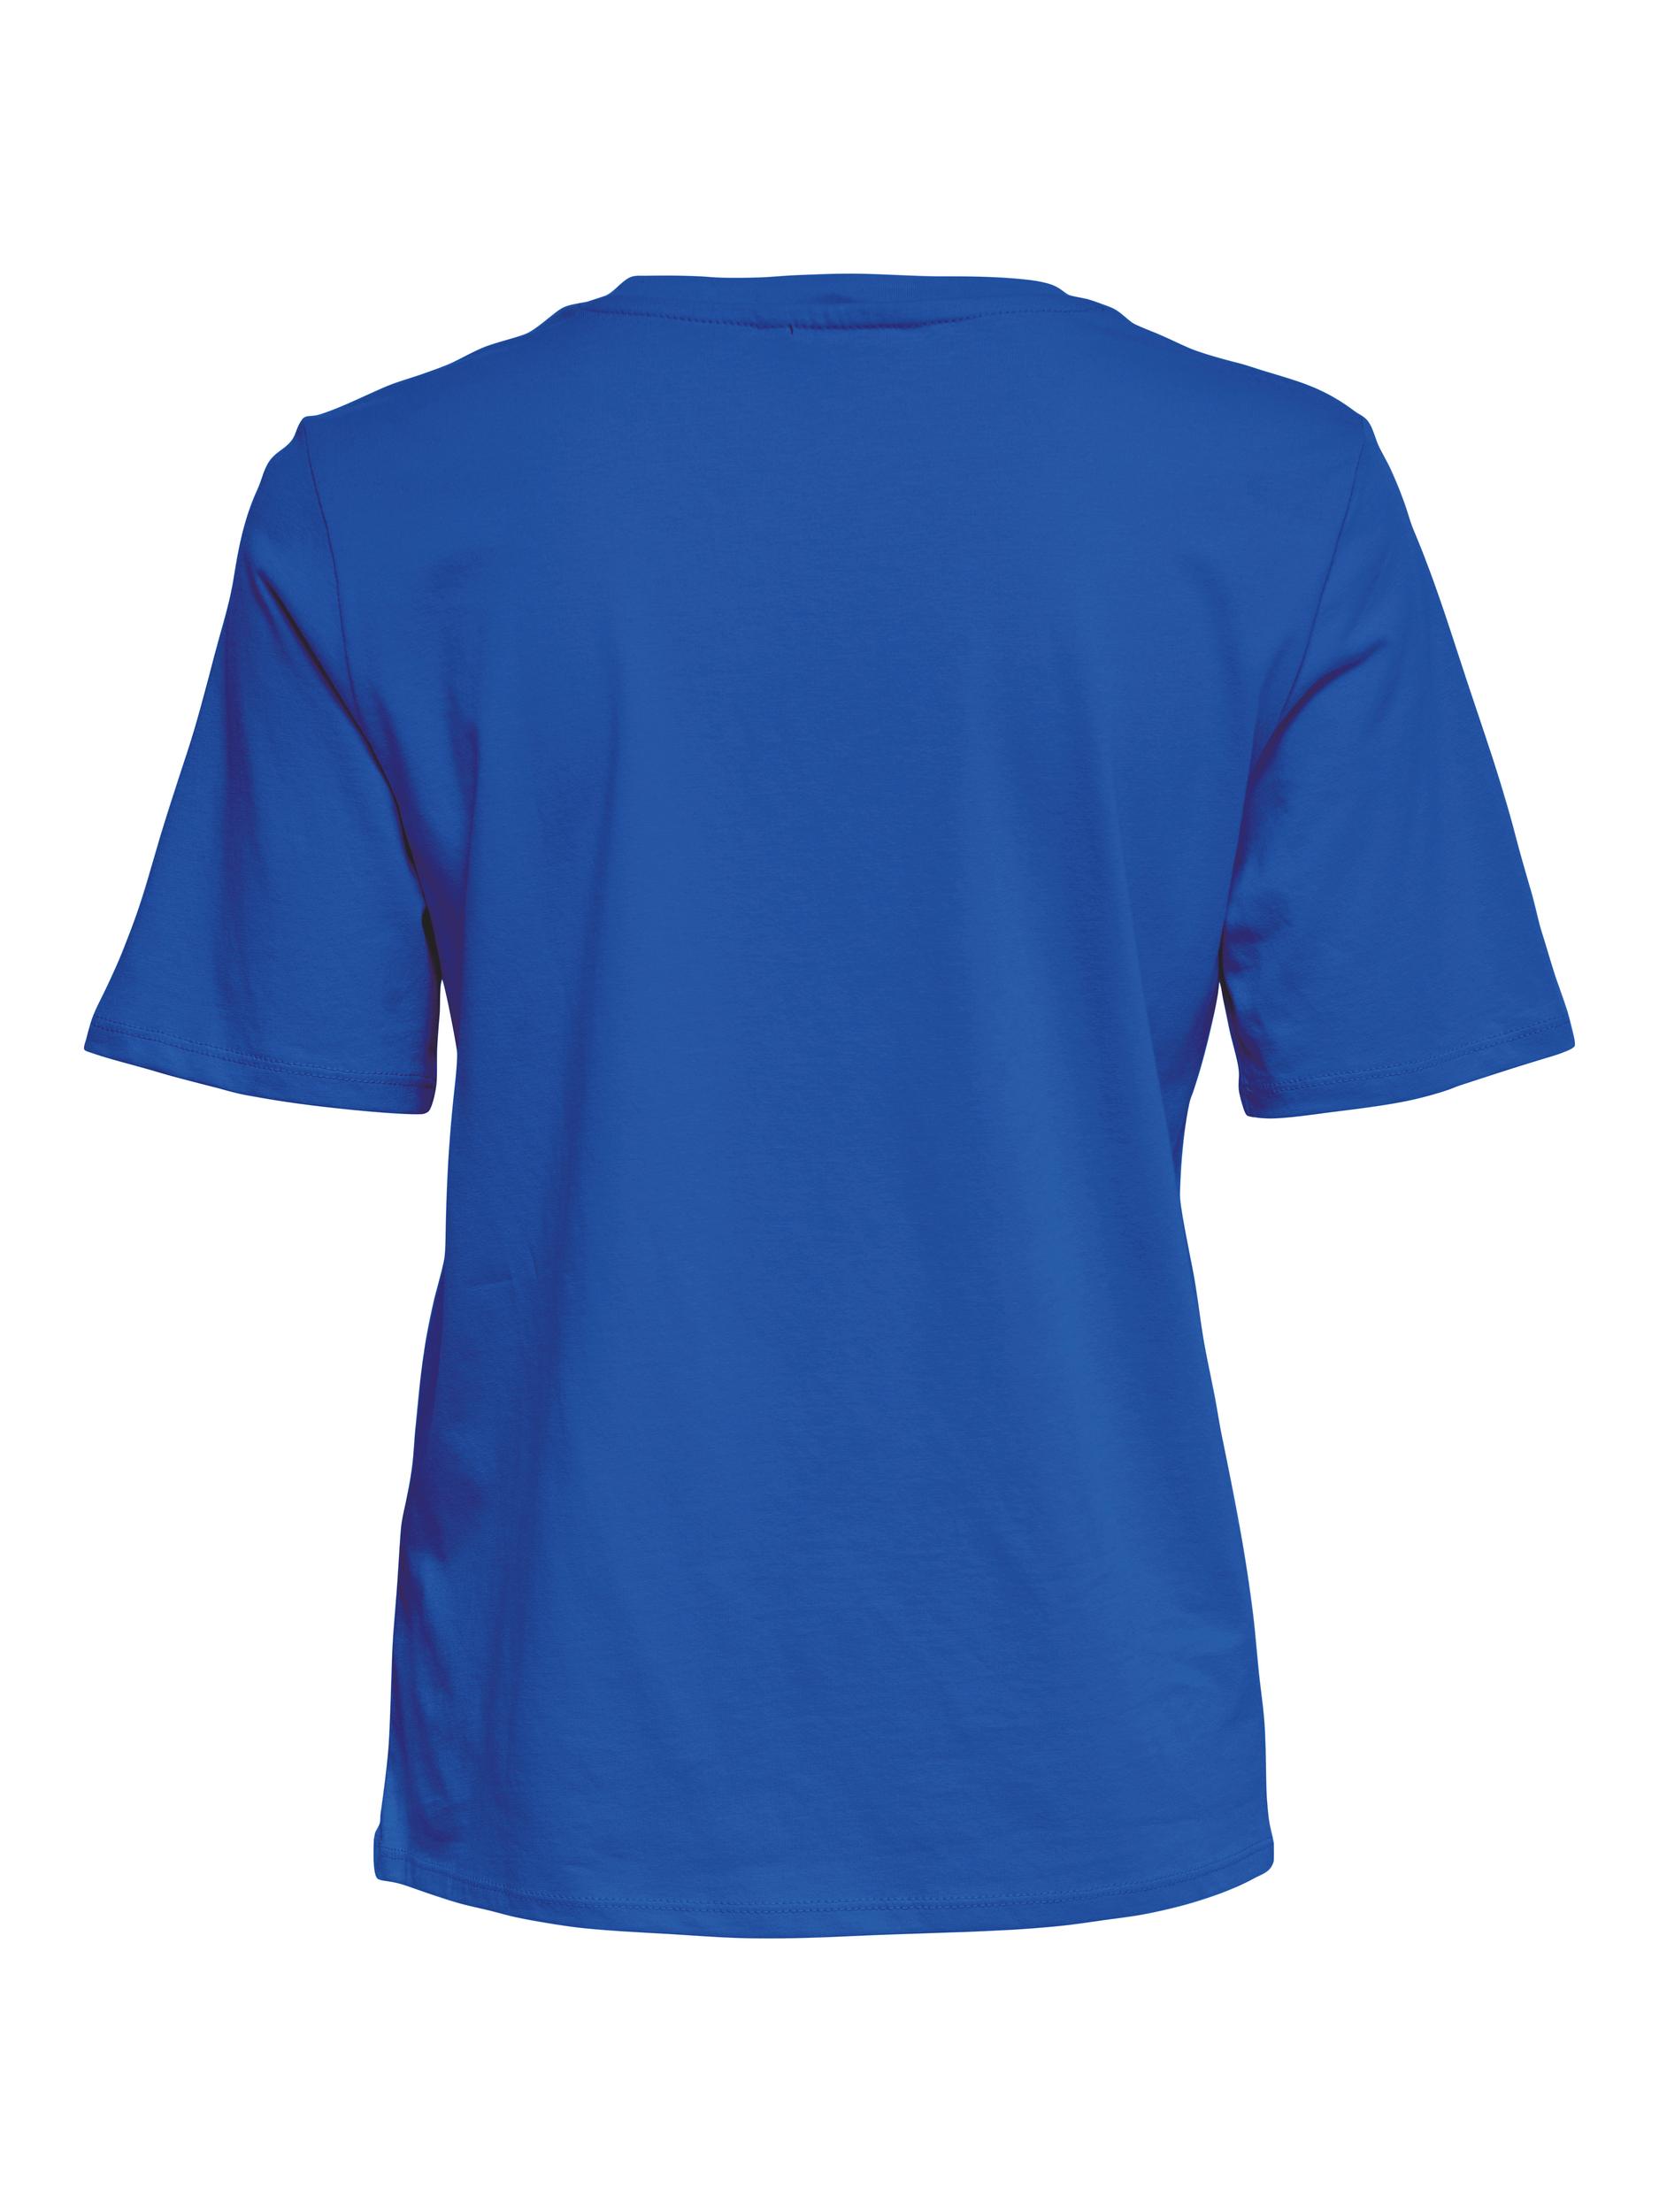  New Only T-shirt, Strong Blue, XS